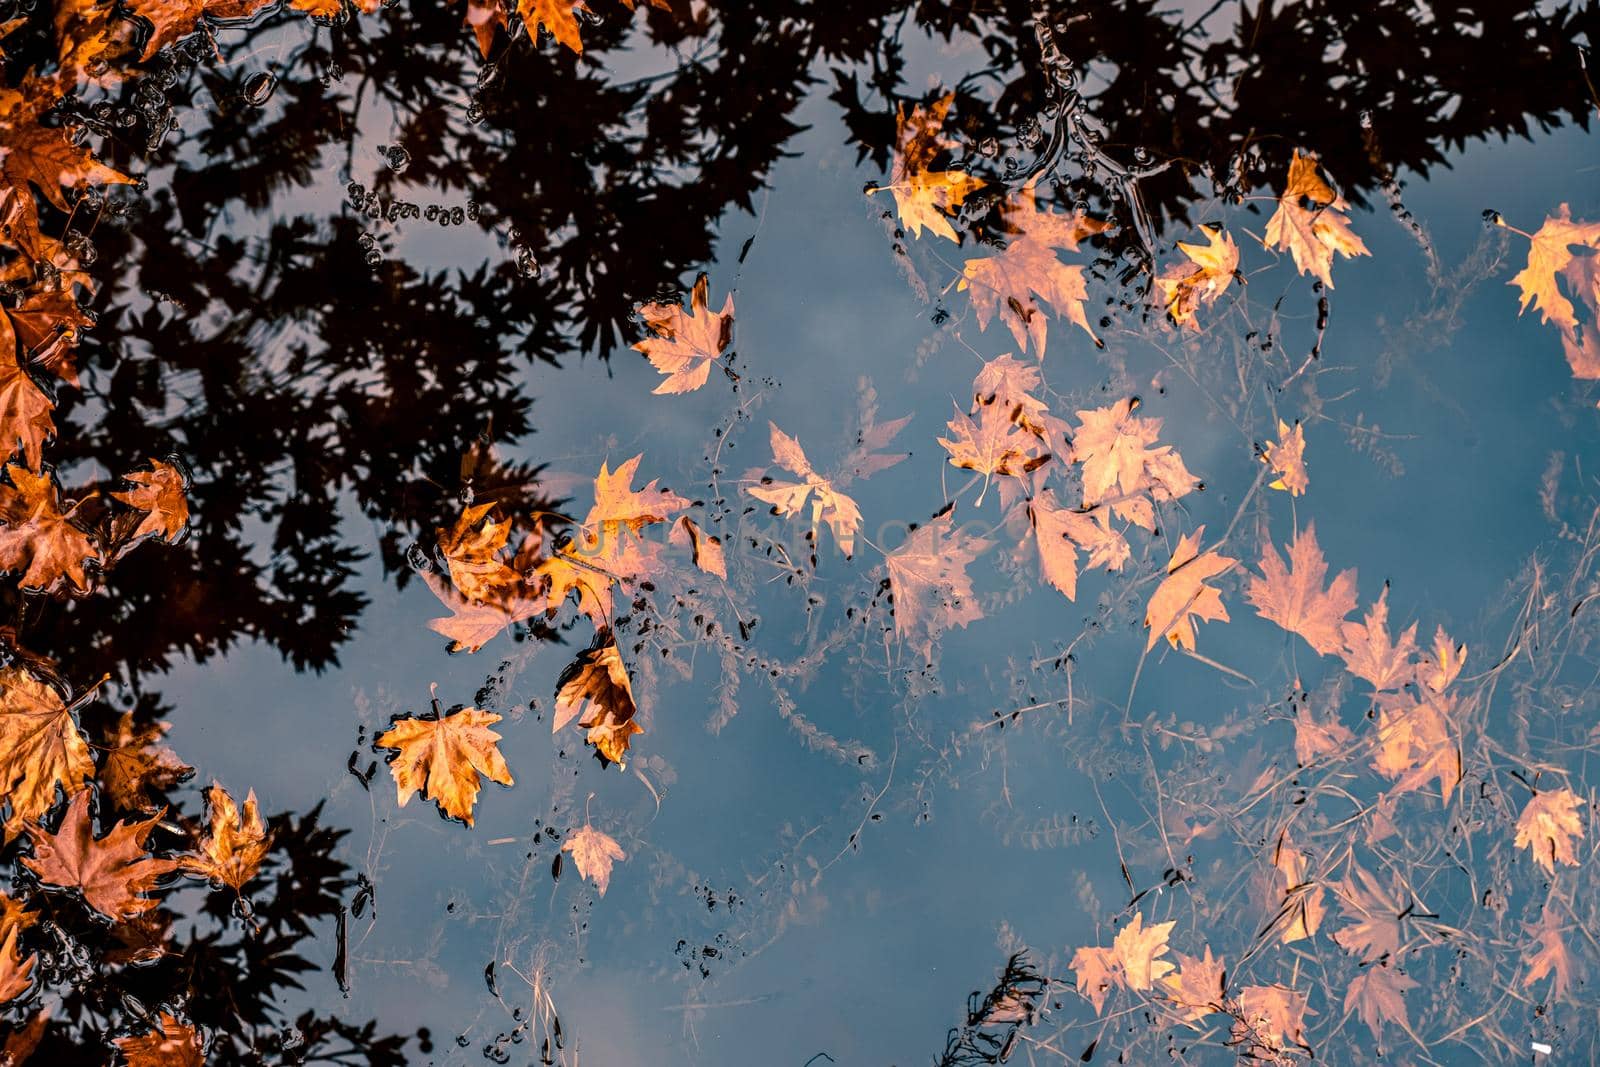 Golden Leaves and reflection of trees in water in autumn